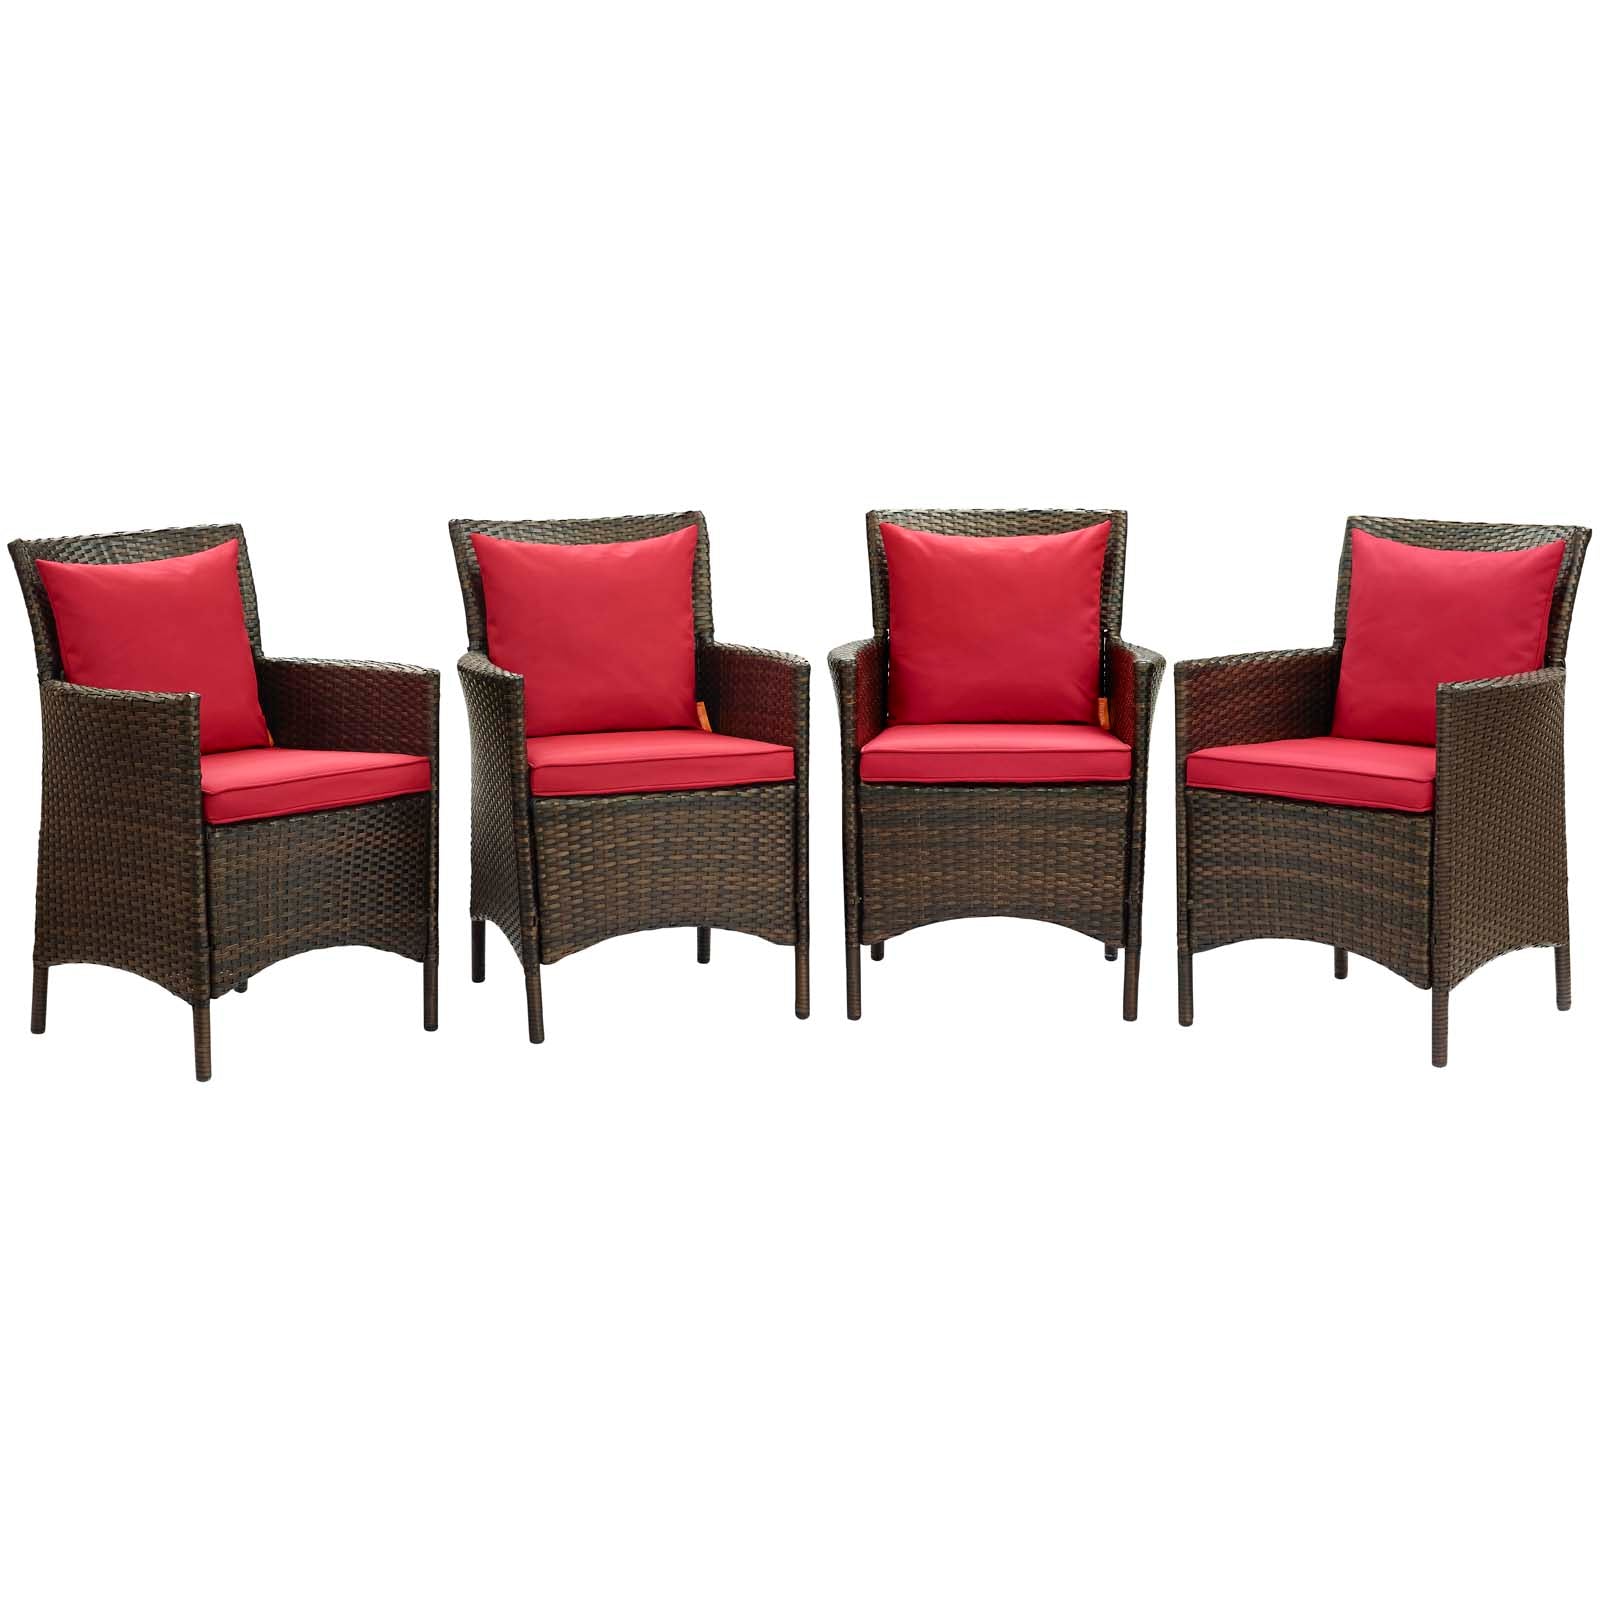 Modway Outdoor Dining Chairs - Conduit Outdoor Patio Wicker Rattan Dining Armchair Set of 4 Brown Red